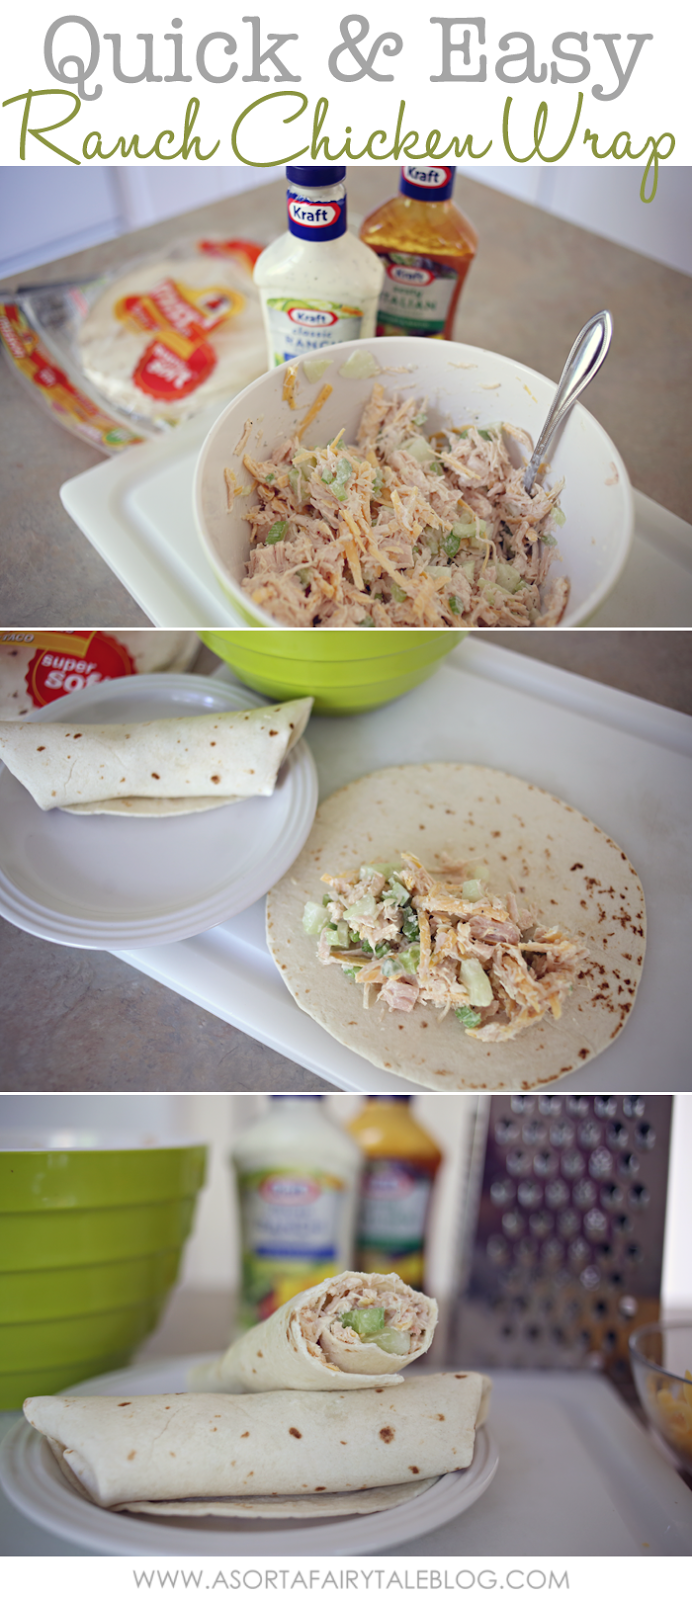 Quick and Easy Ranch Chicken Wrap Recipe